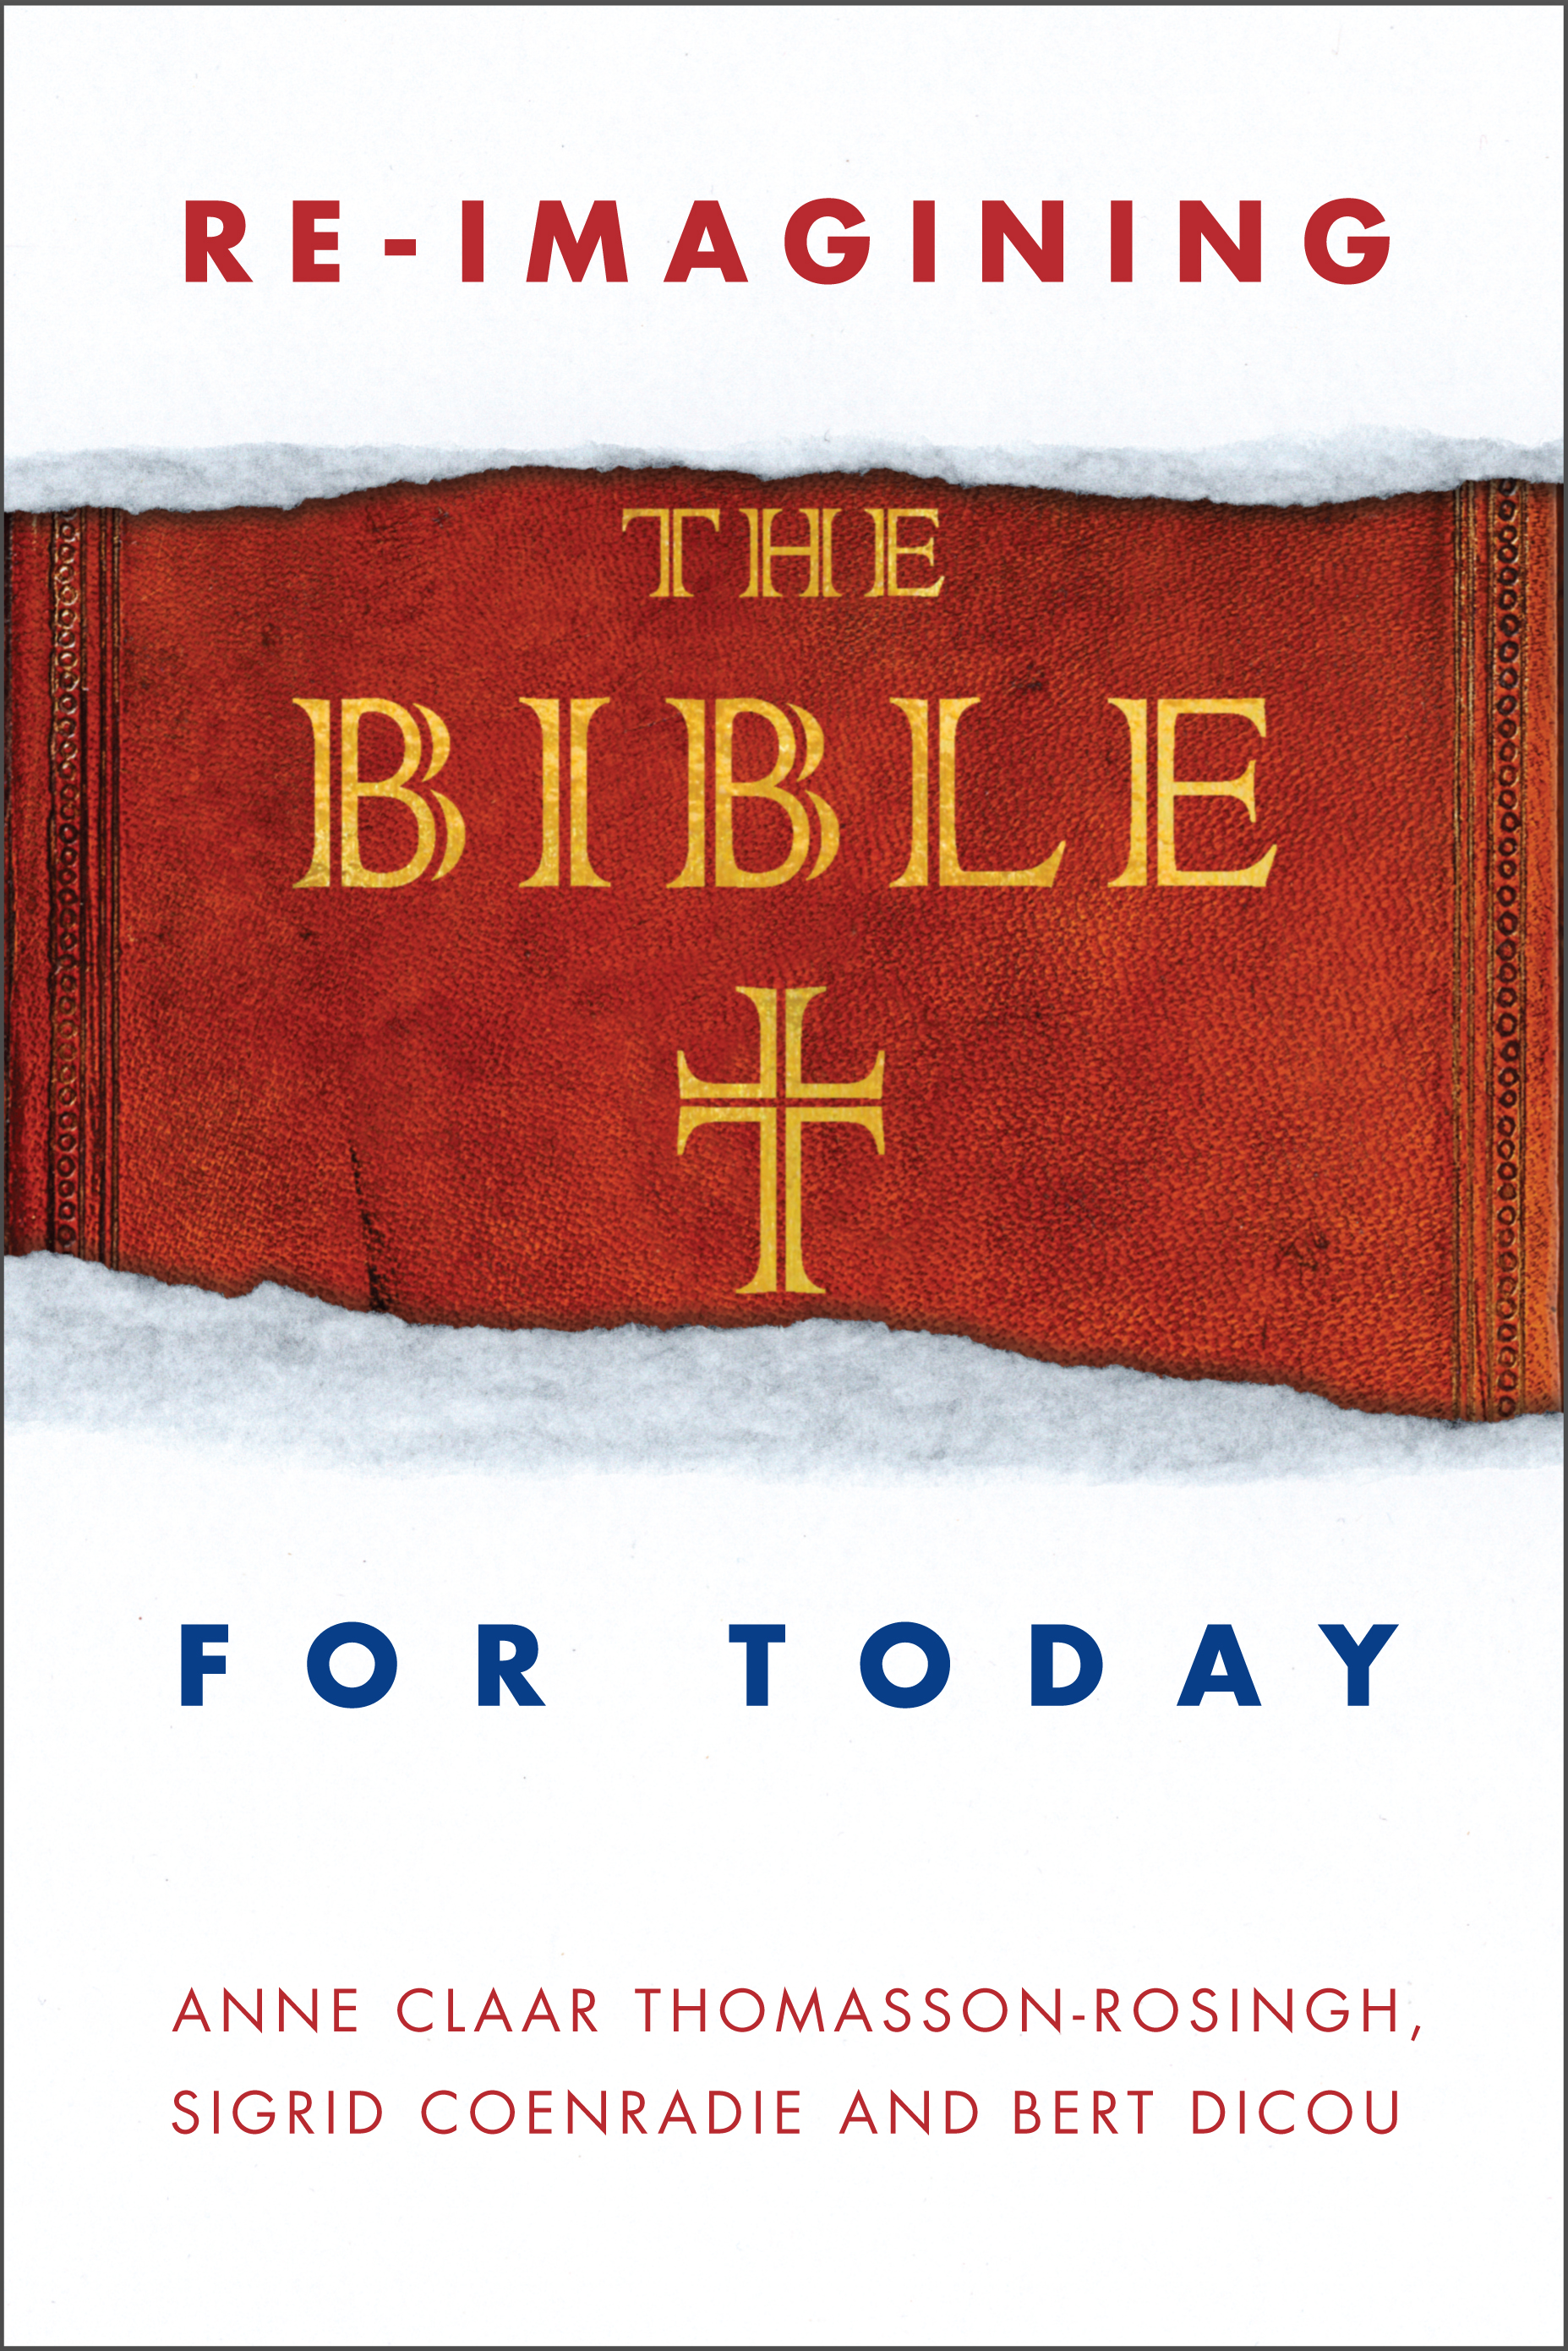 Re-Imagining the Bible For Today